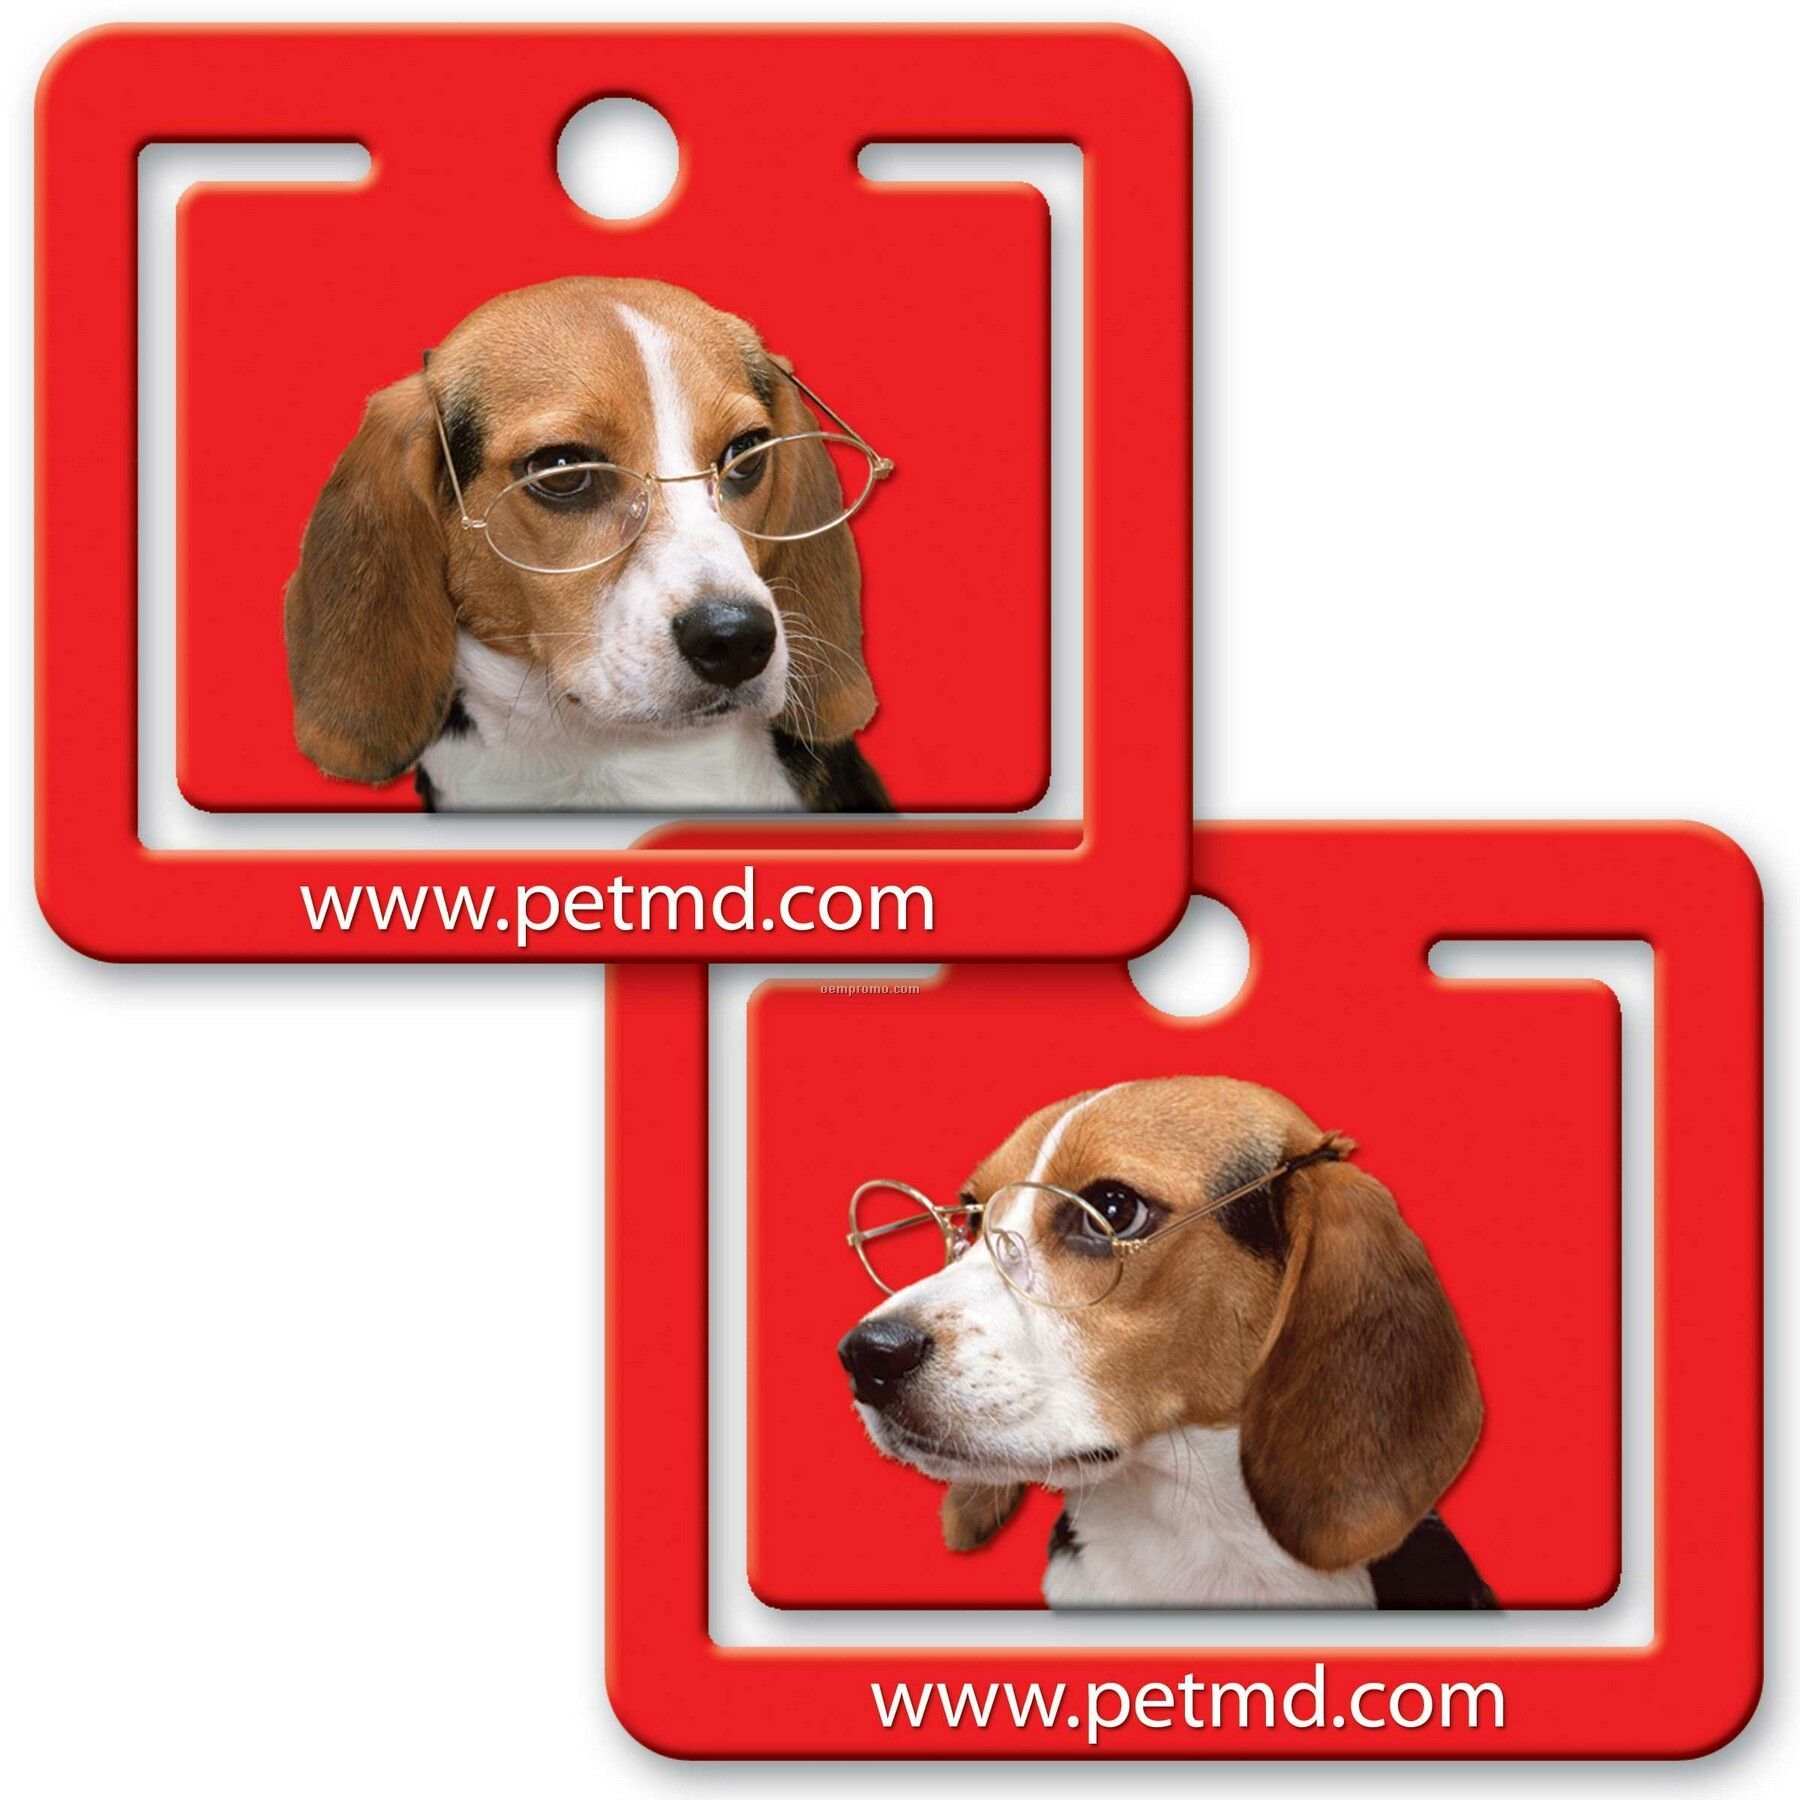 Paper Clip W/3d Lenticular Image Of A Beagle Wearing Glasses (Imprinted)